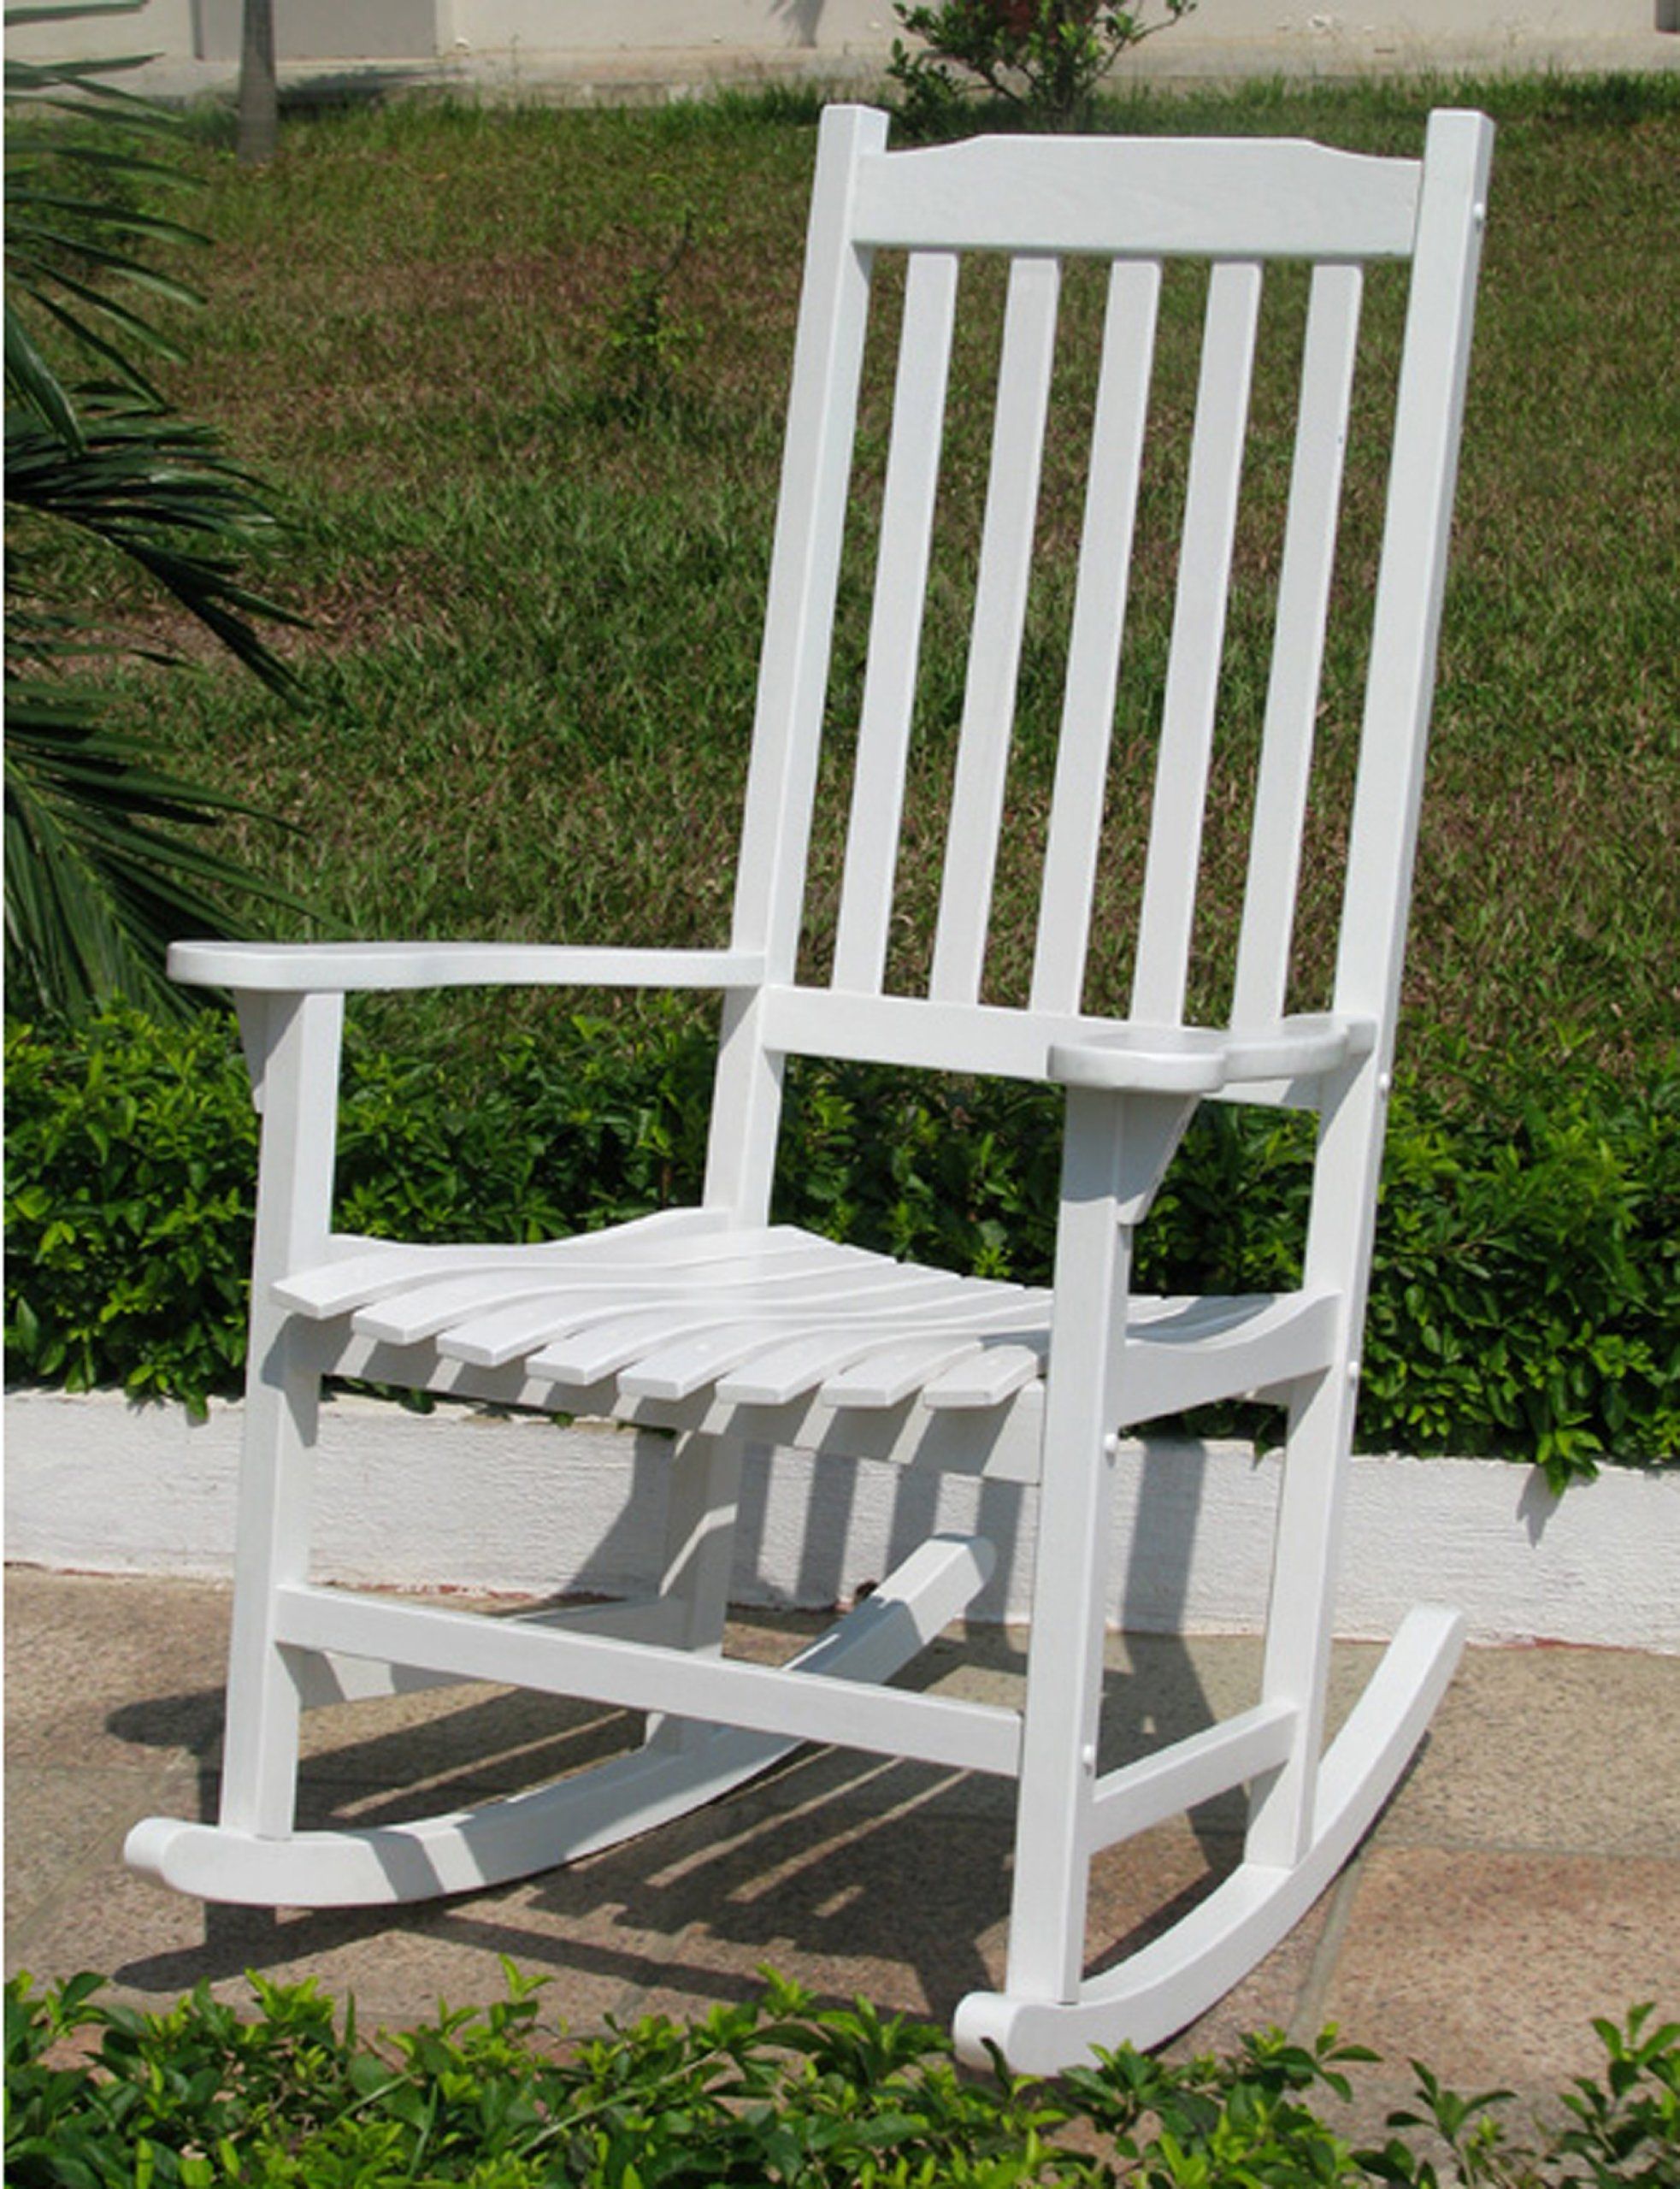 Amazon : Merry Garden White Paint Traditional Rocking Chair : Patio Within White Wood Soutdoor Seating Sets (View 3 of 15)